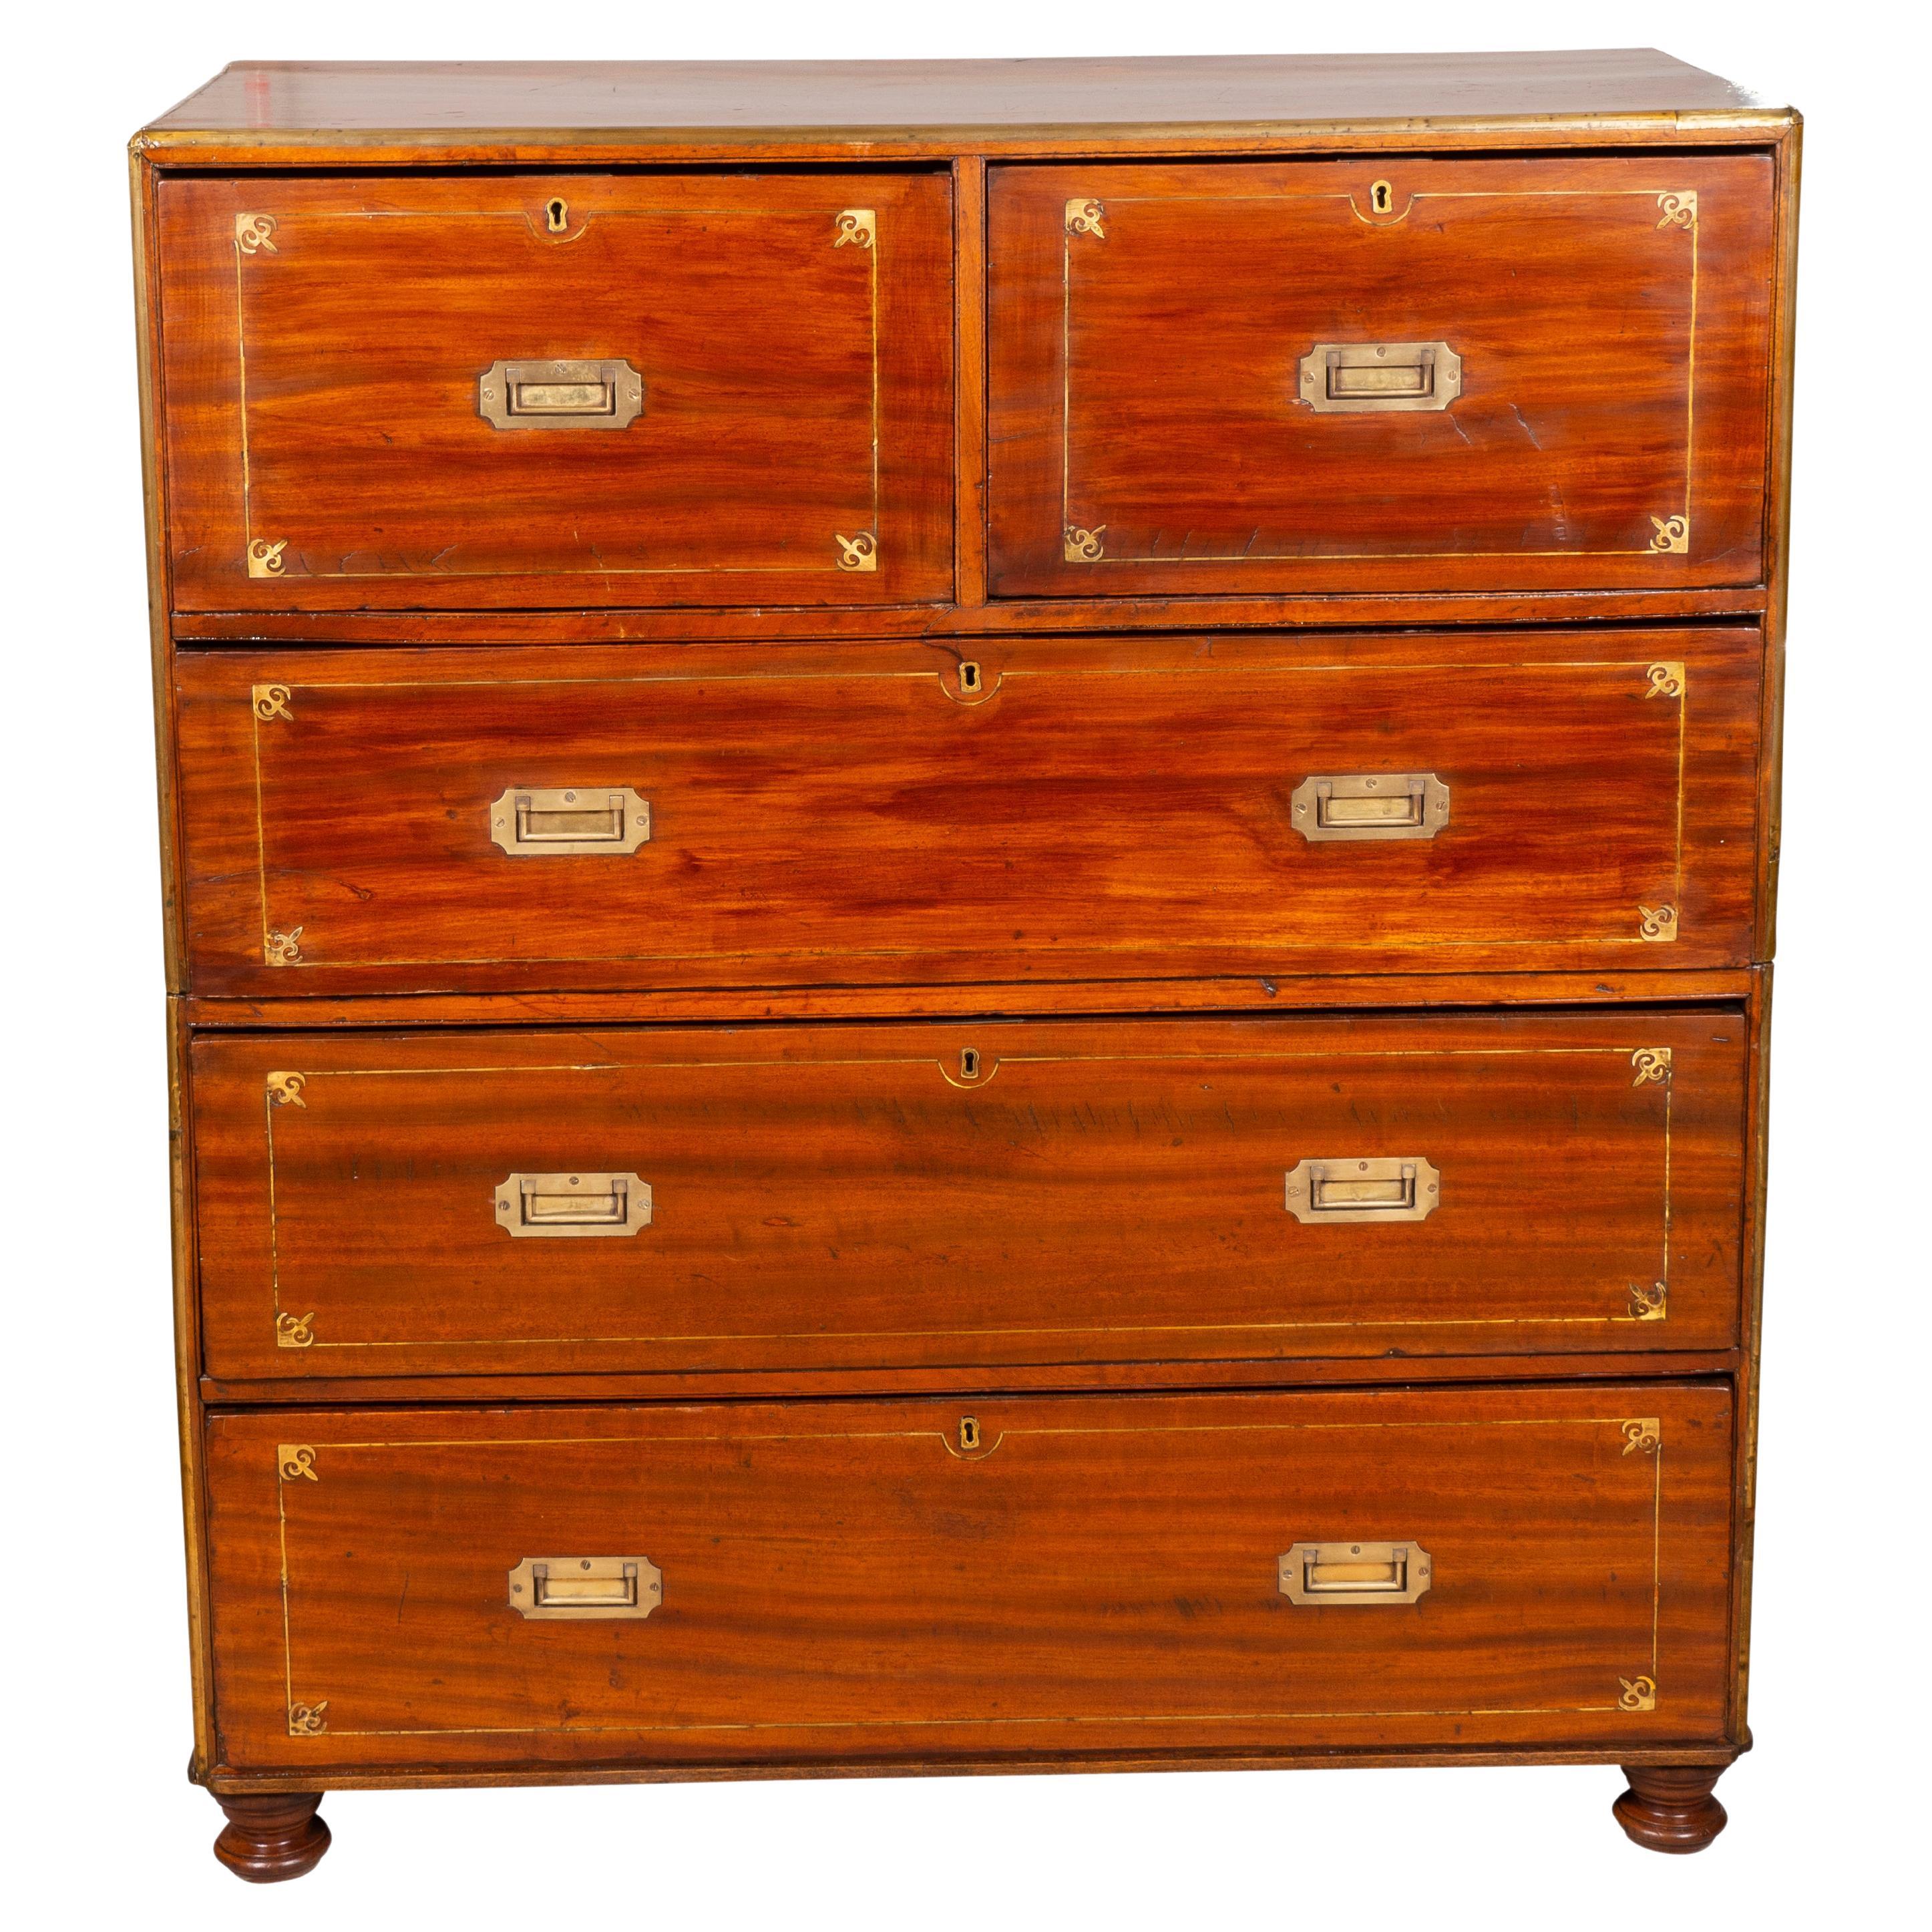 Unusually large with a rectangular top with brass edge which continues throughout the whole case. Two drawers over three long drawers all with brass inlay and recessed handles, original toupee feet. In two parts with side bail handles.